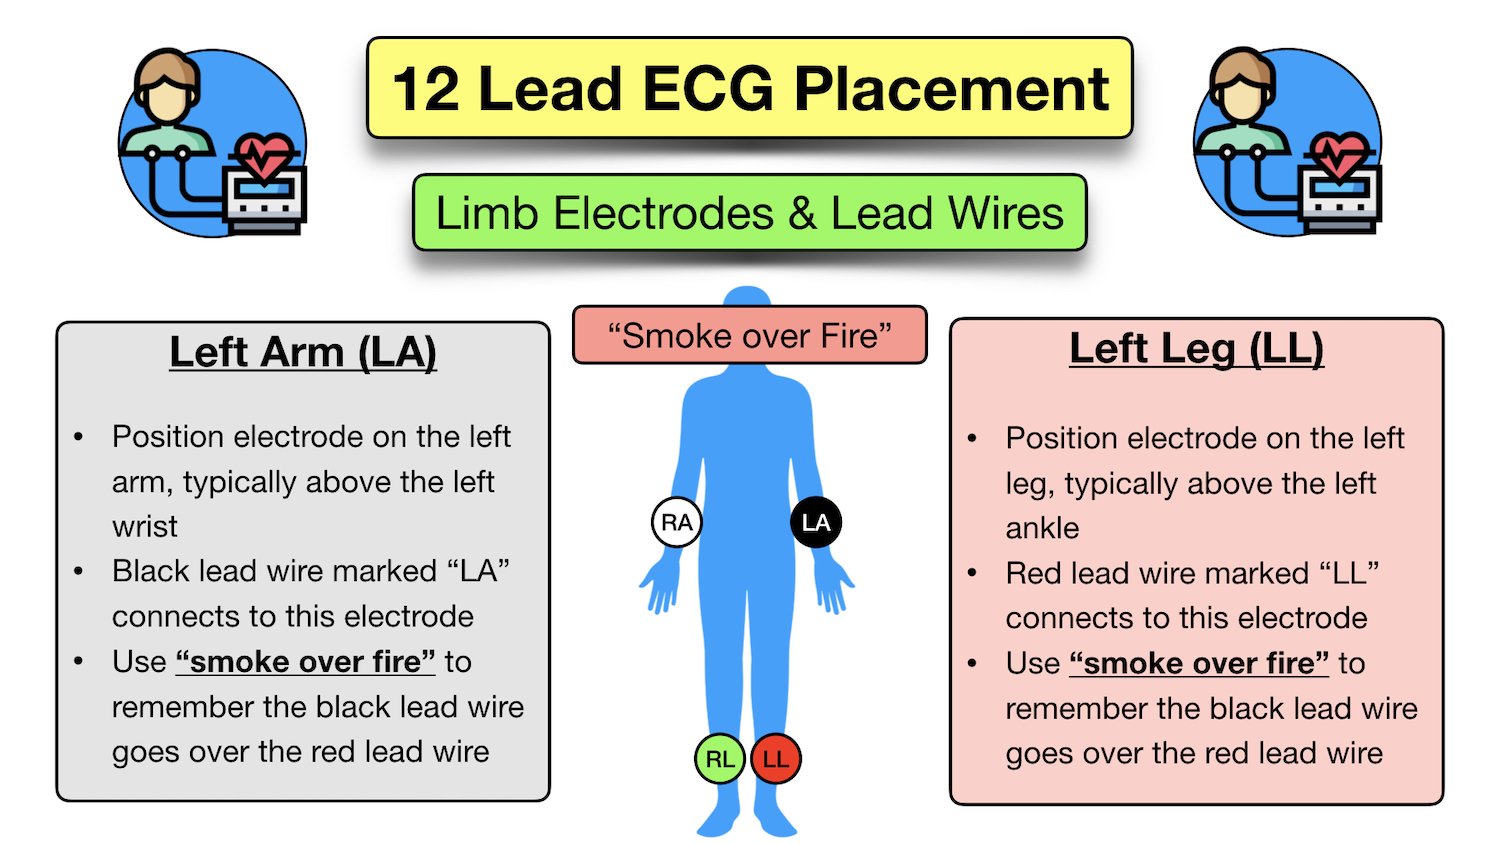 12 Lead ECG Placement Guide